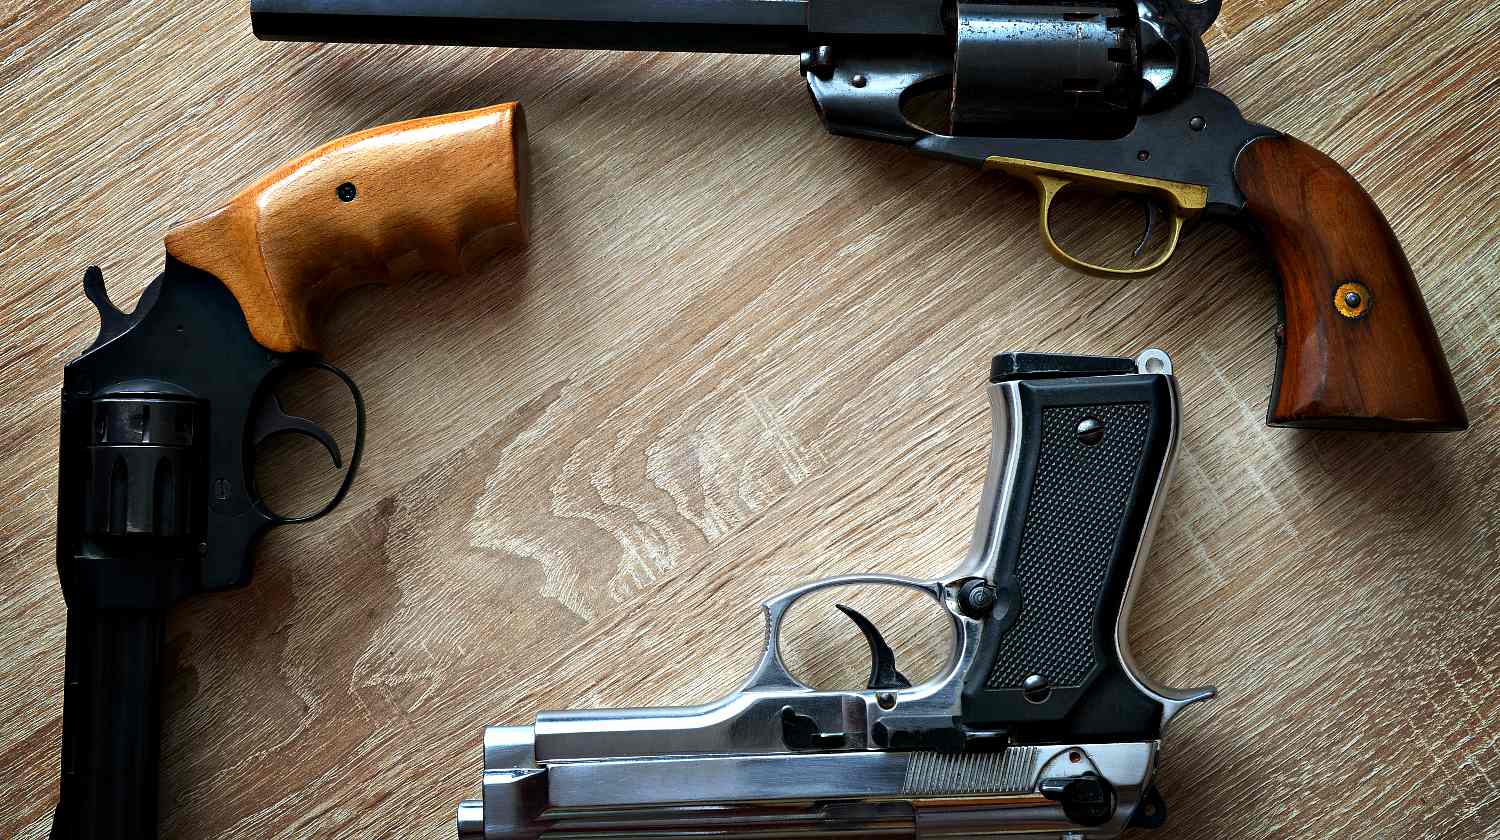 Three pistols on wooden board | Revolvers for Survival | The Best Guns That Stood The Test Of Time | Featured